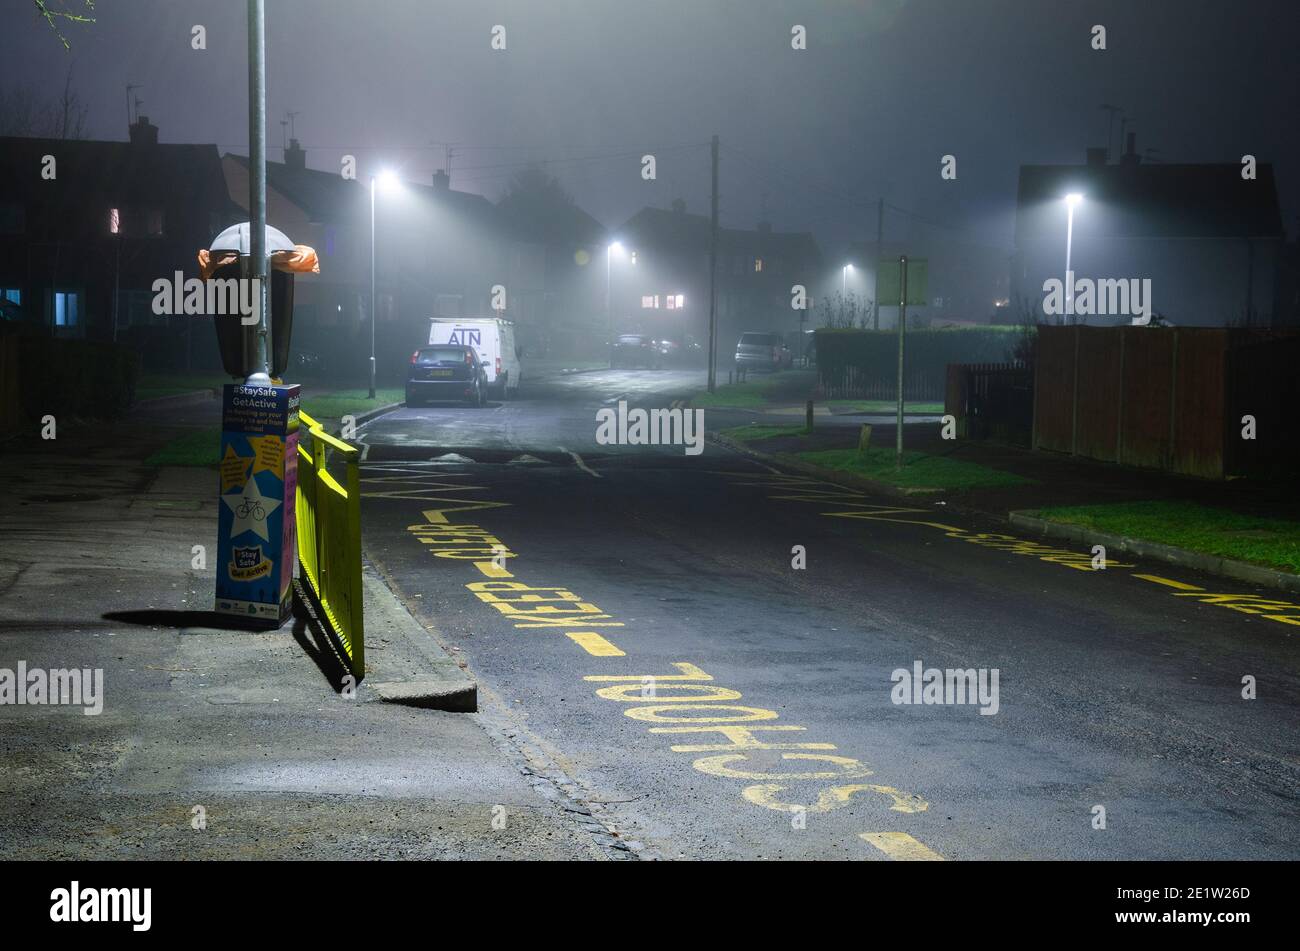 Nighttime shot of 'School Keep Clear' painted on a road in a residential area. Street lights look diffused in the fog. Stock Photo